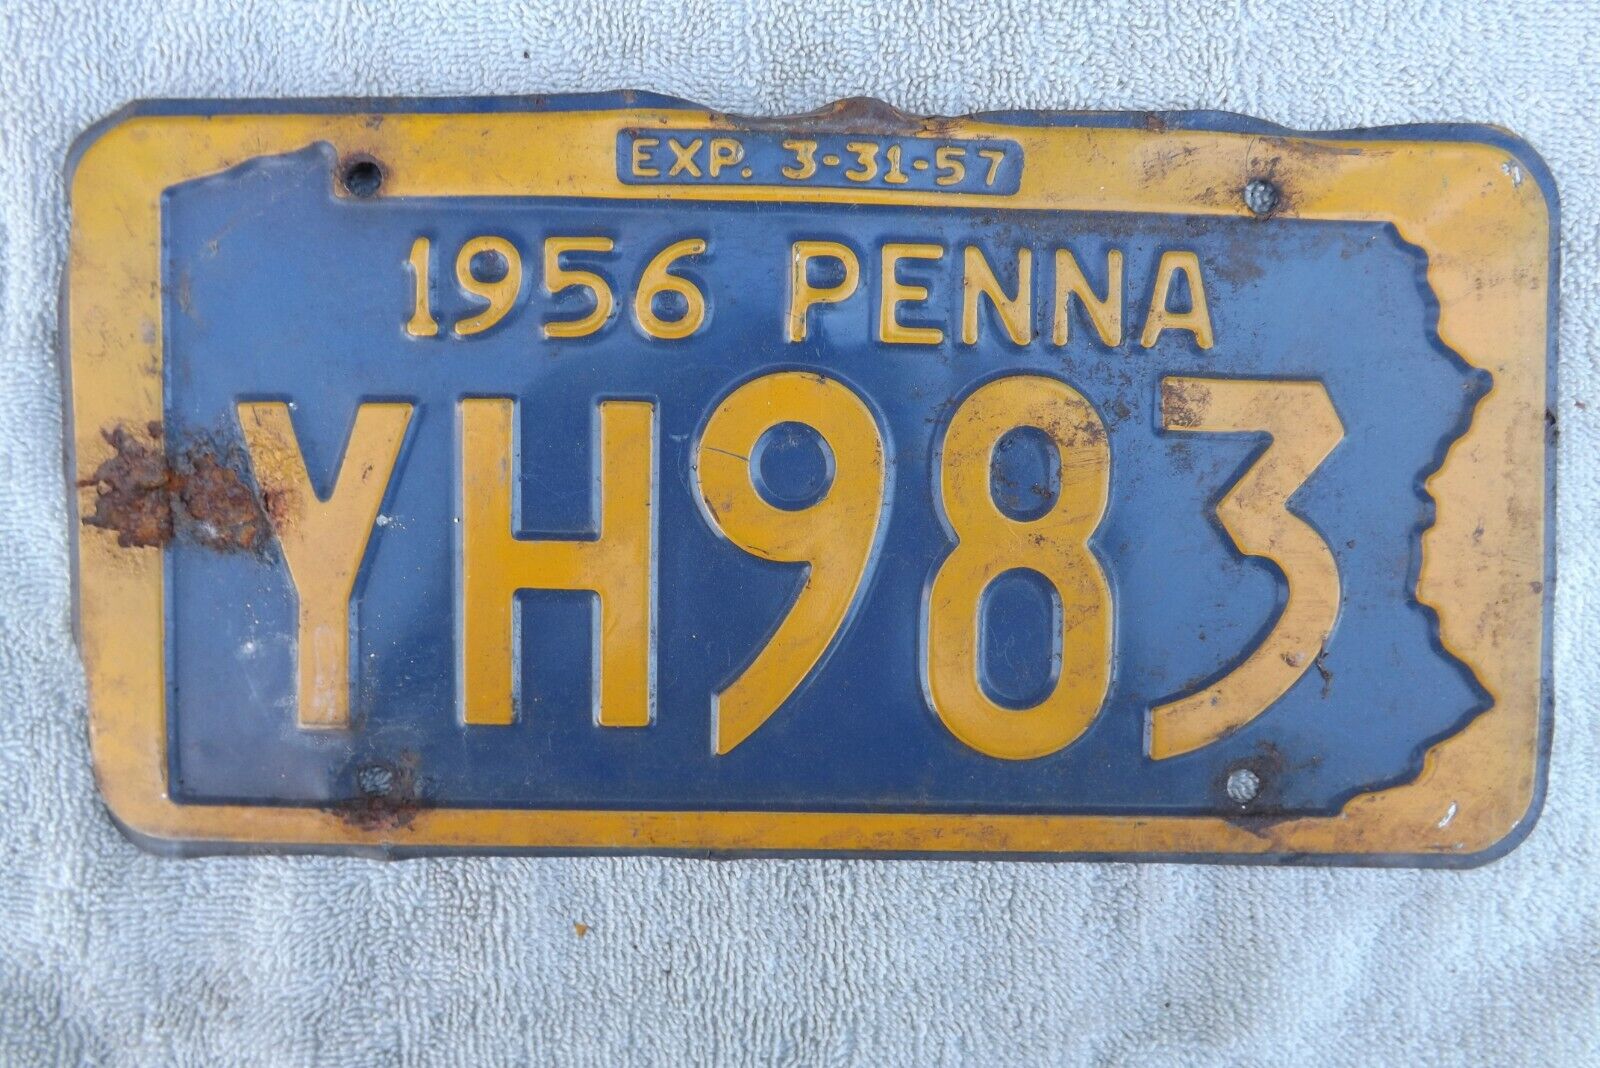 1956 (Exp 3-31-57) Pennsylvania PA  YH983 License Plate Bent, Some Rust+Dirt